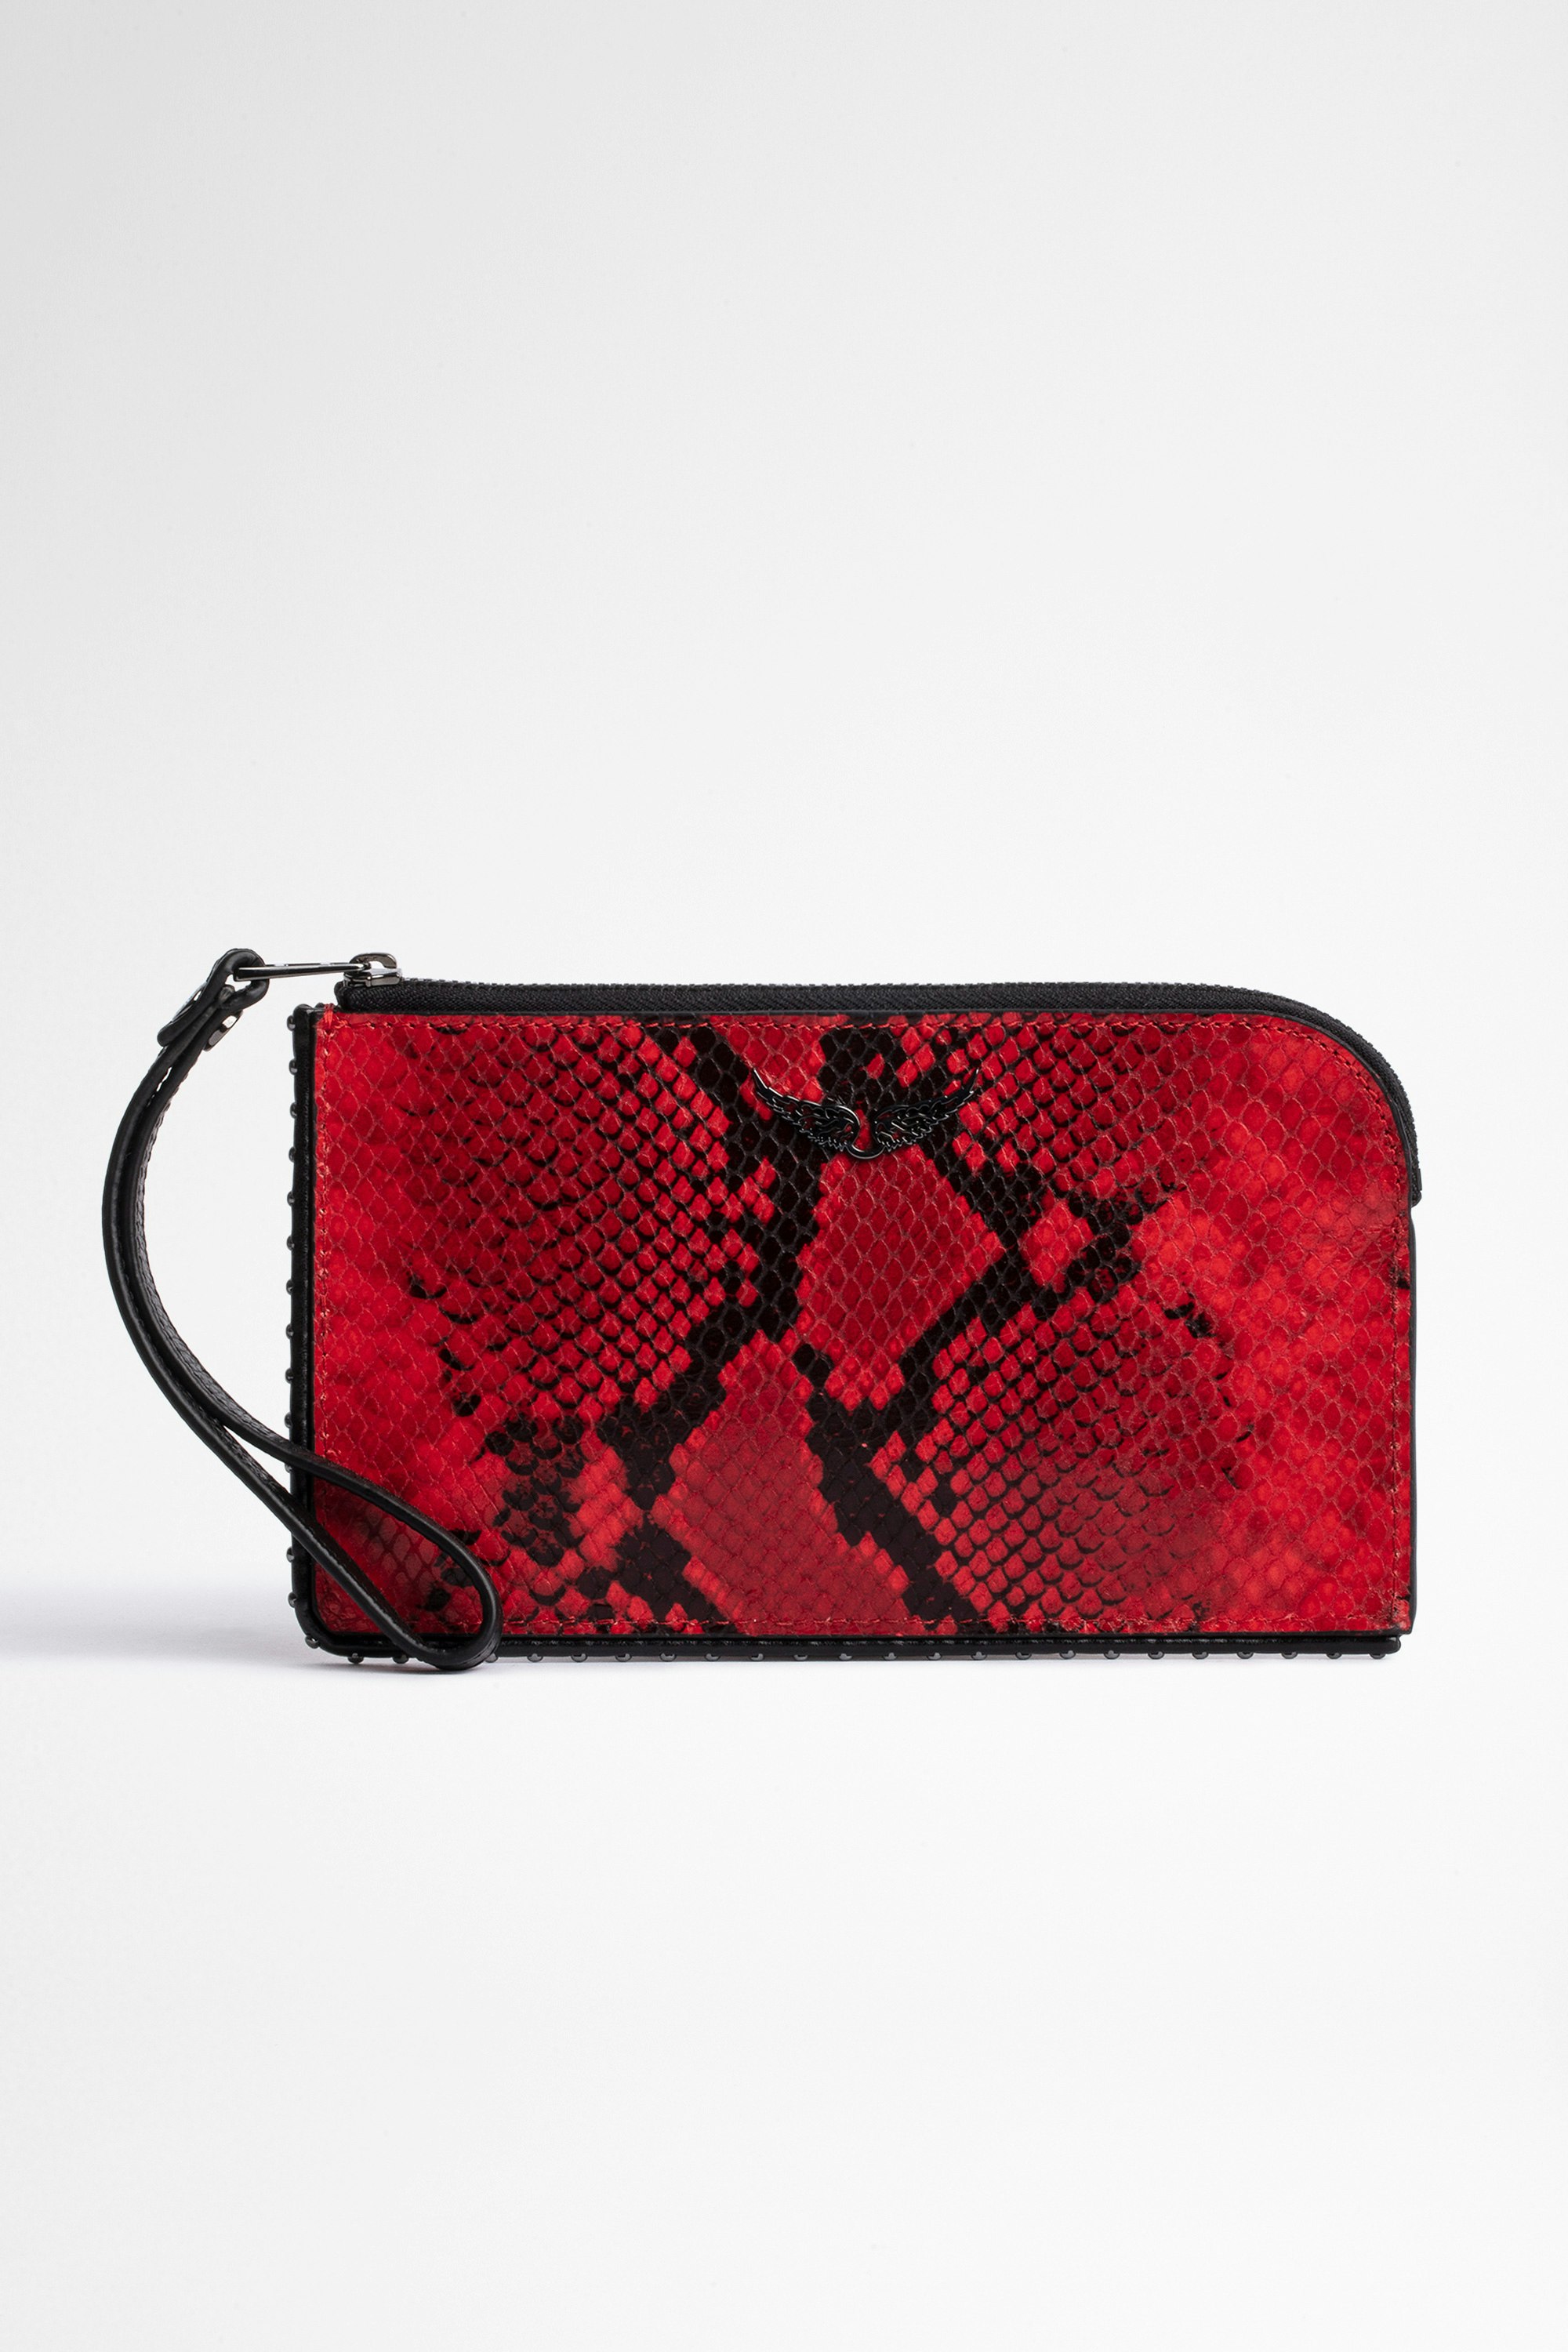 Phone Wallet Pouch Women's snakeskin-effect red leather pouch